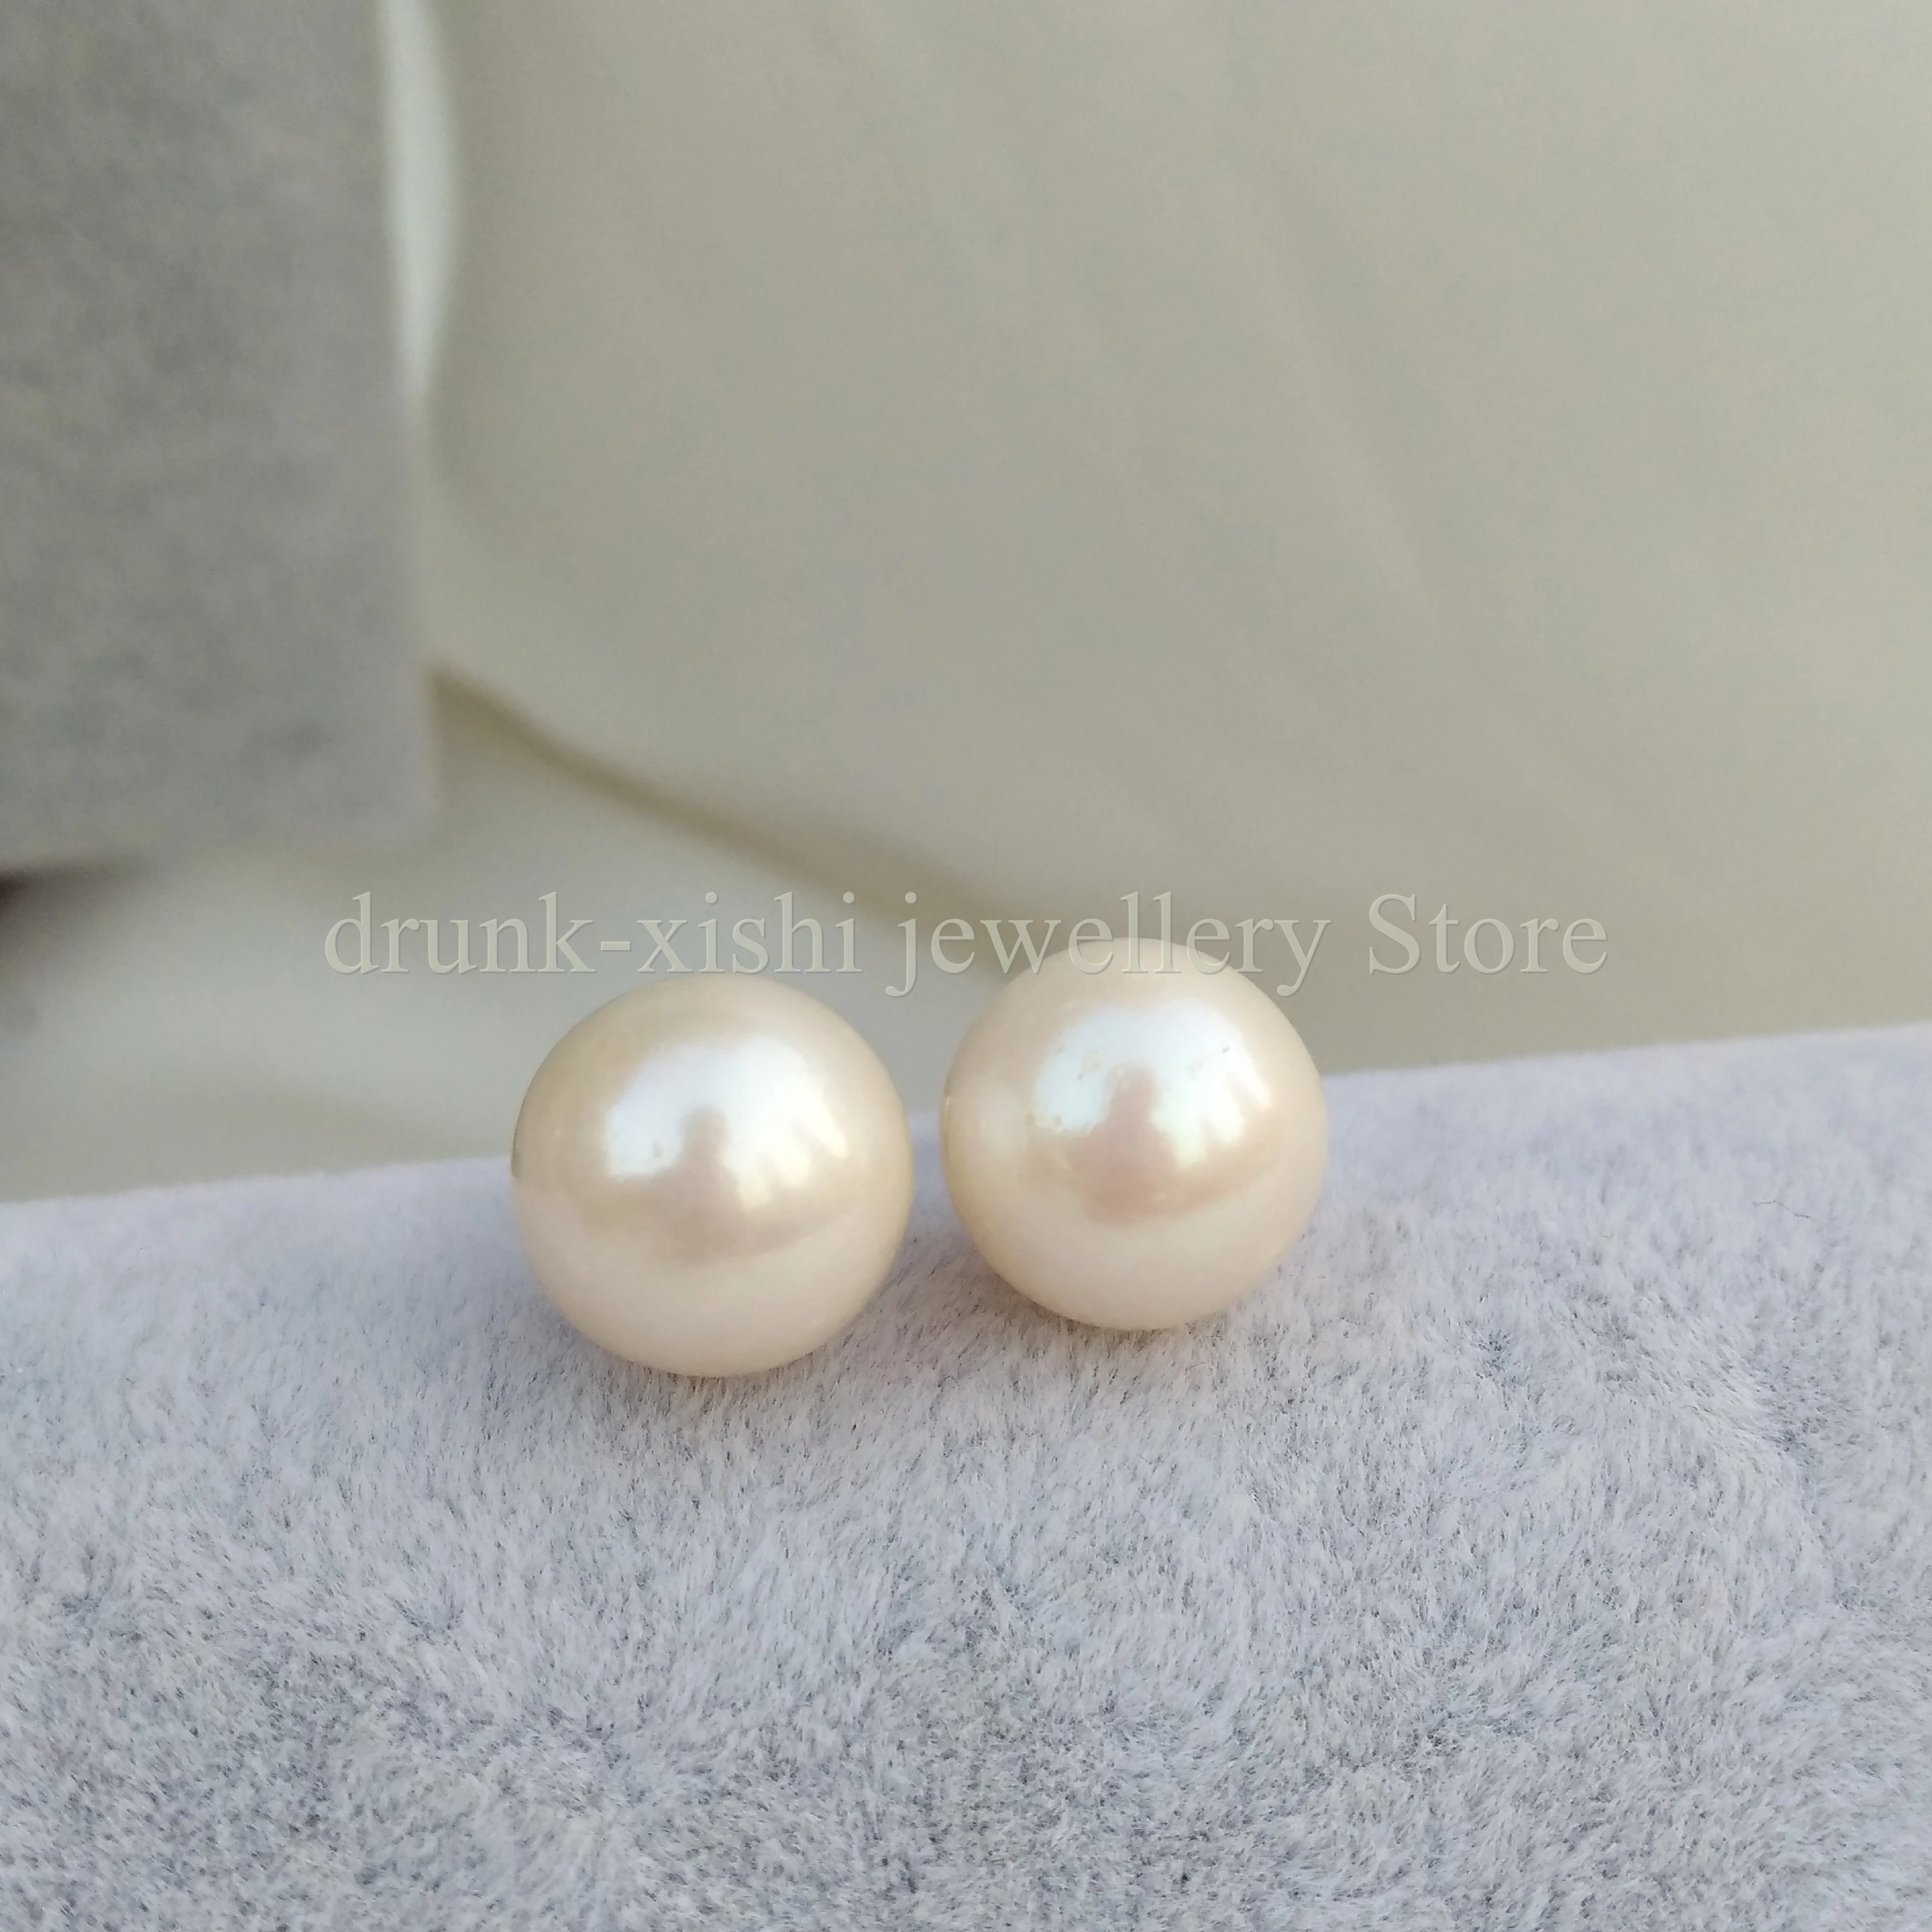 

OL Vintage AAA+ South Sea 9-10mm Pearl White Stud Round Earrings Unique For Women Wedding Party Imitation Free Shipping